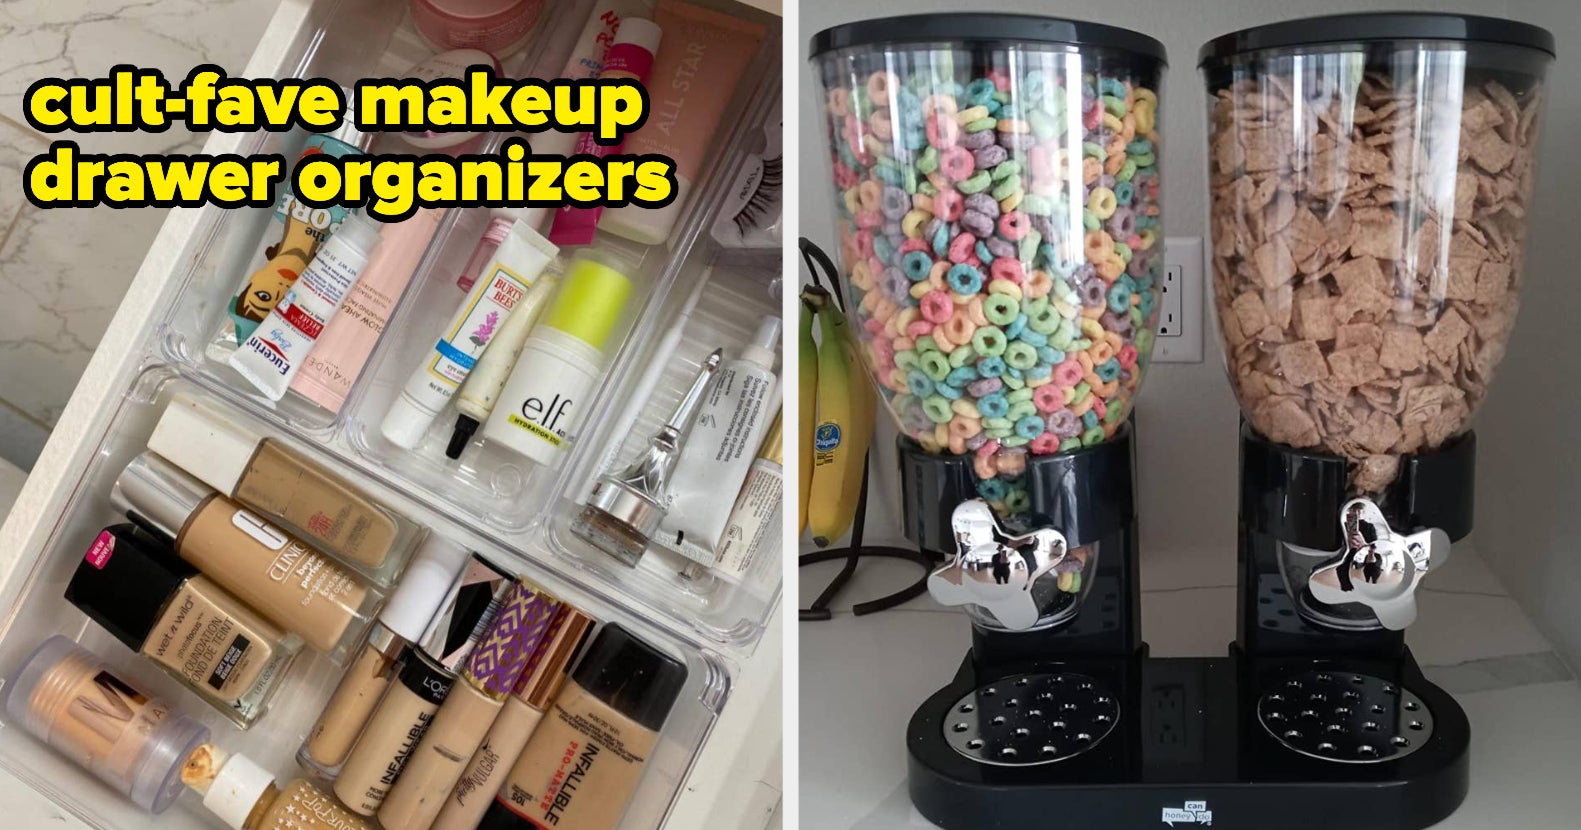 7 Home Organization Must-Haves We Discovered Through TikTok